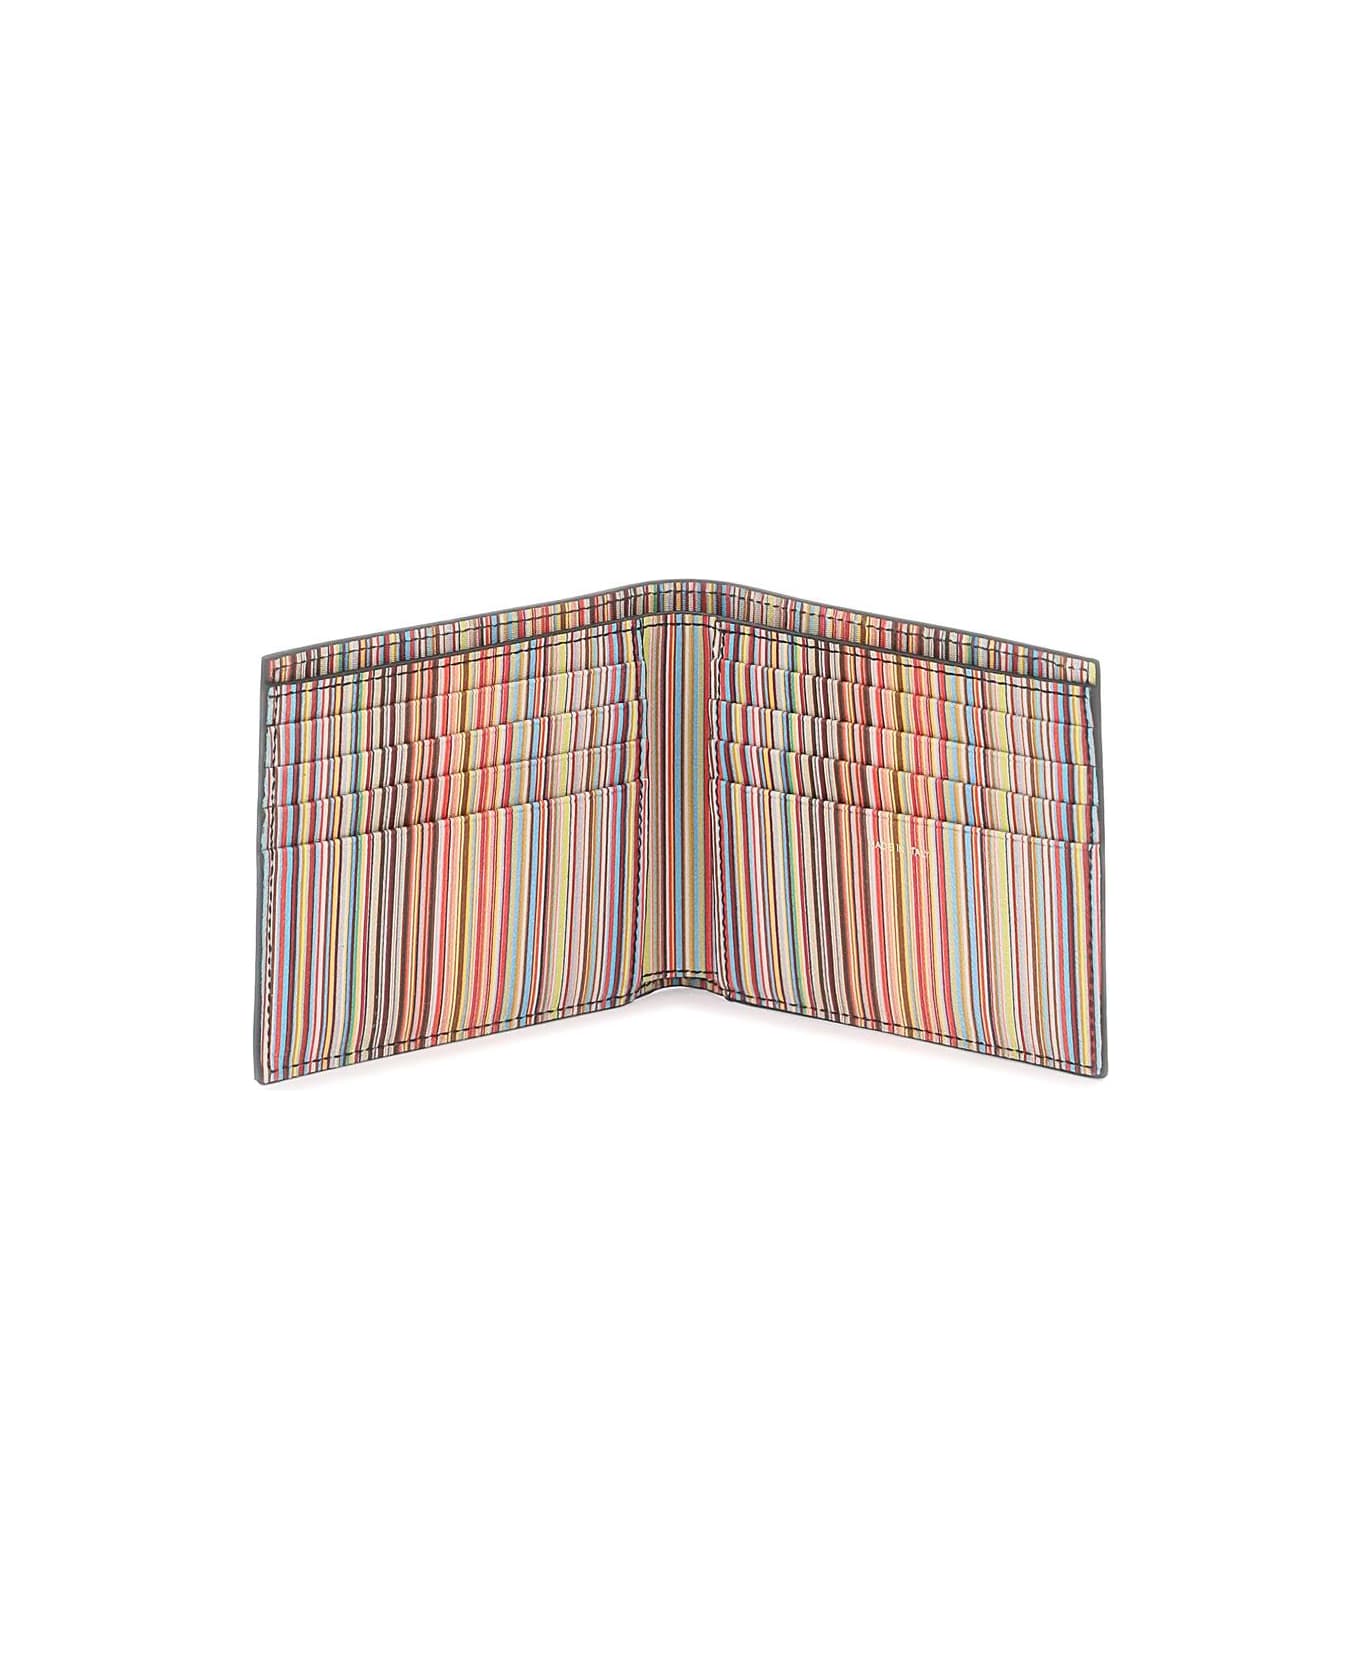 PS by Paul Smith 'signature Stripe' Wallet - Black